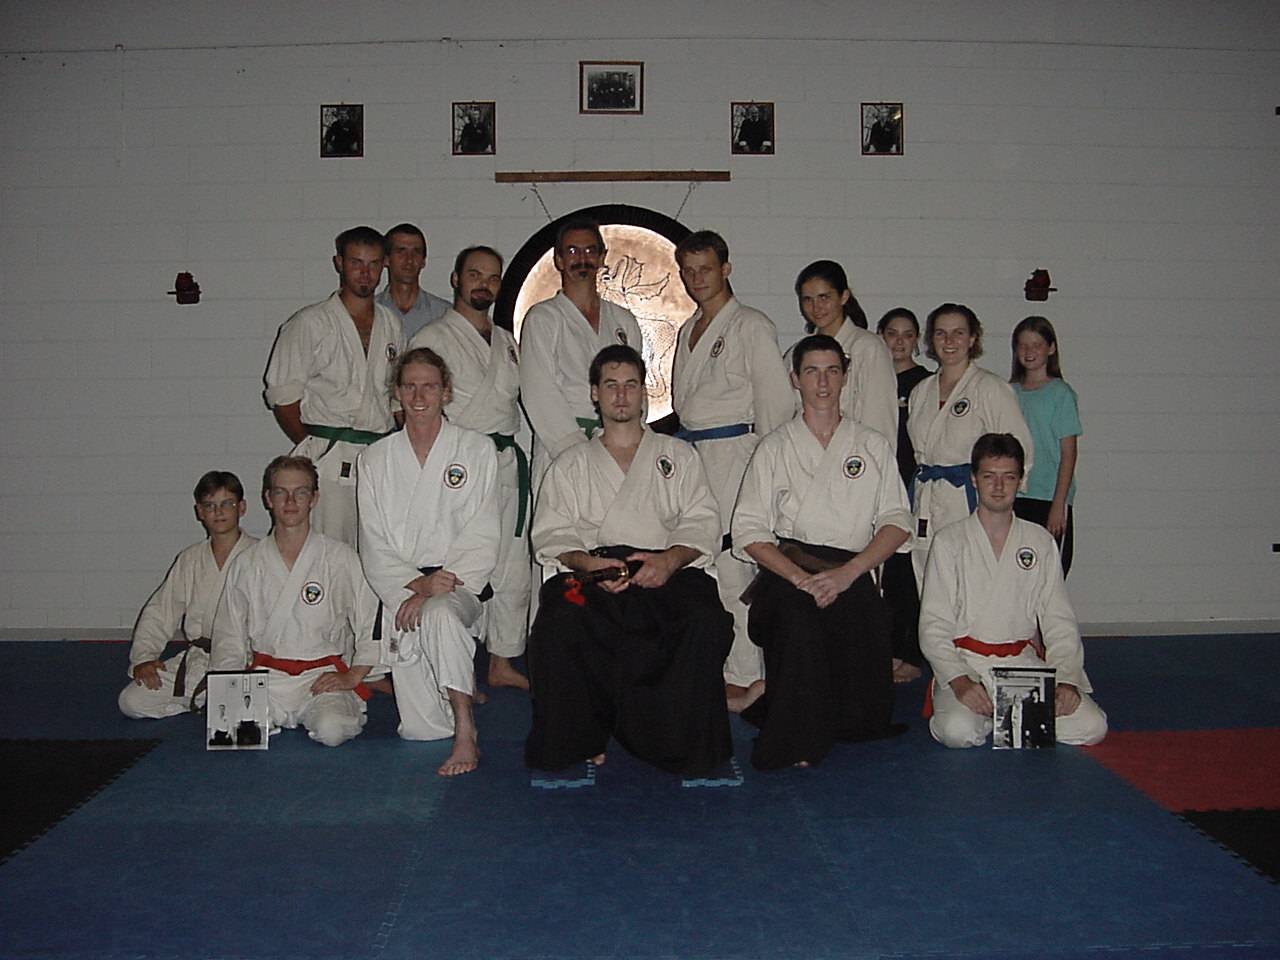 Club photo from the old days